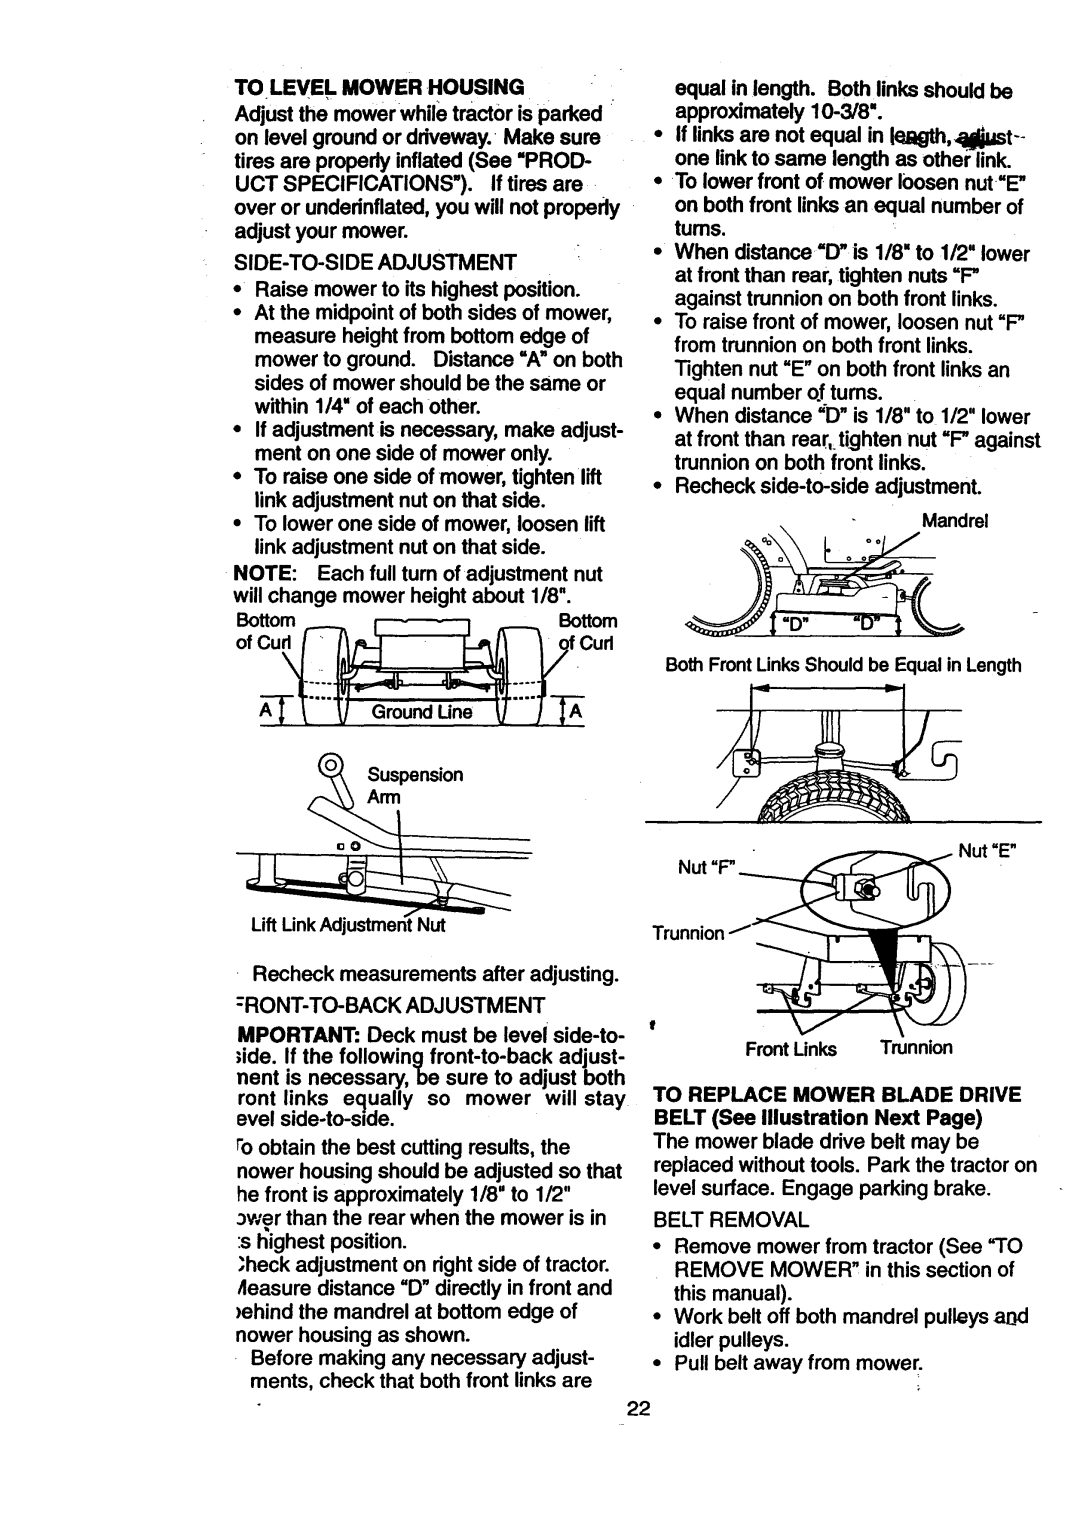 Craftsman 917.270512 ofcu. - Qfcu, To Level Mowerhousing, Side-To-Sideadjustment, •Raise mower to its highestposition 